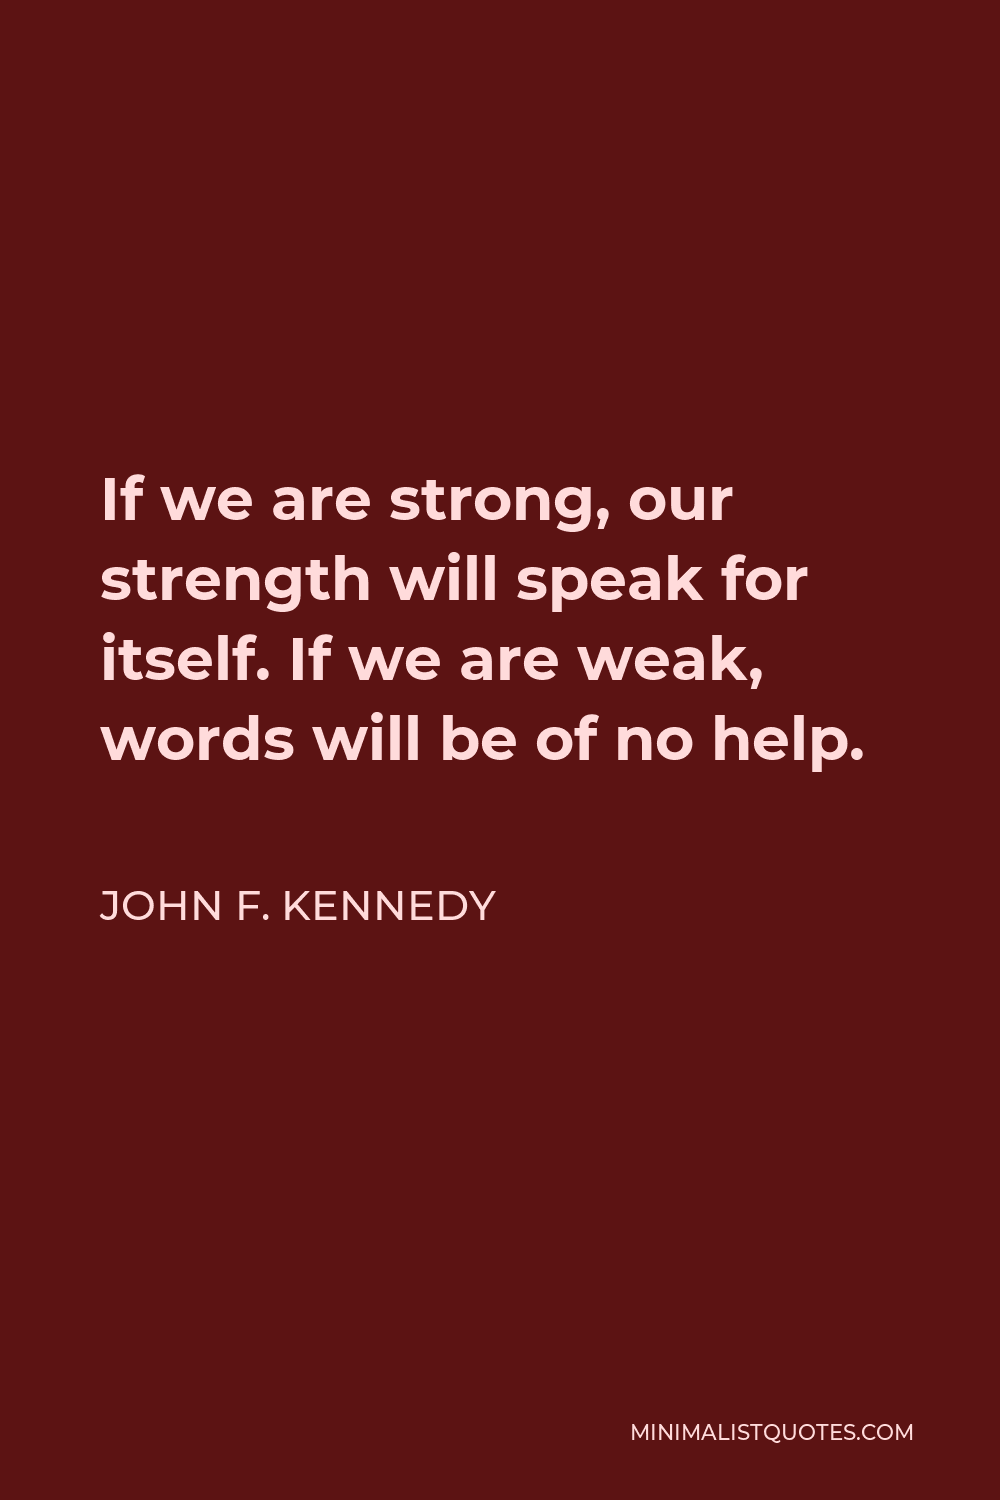 John F. Kennedy Quote - If we are strong, our strength will speak for itself. If we are weak, words will be of no help.